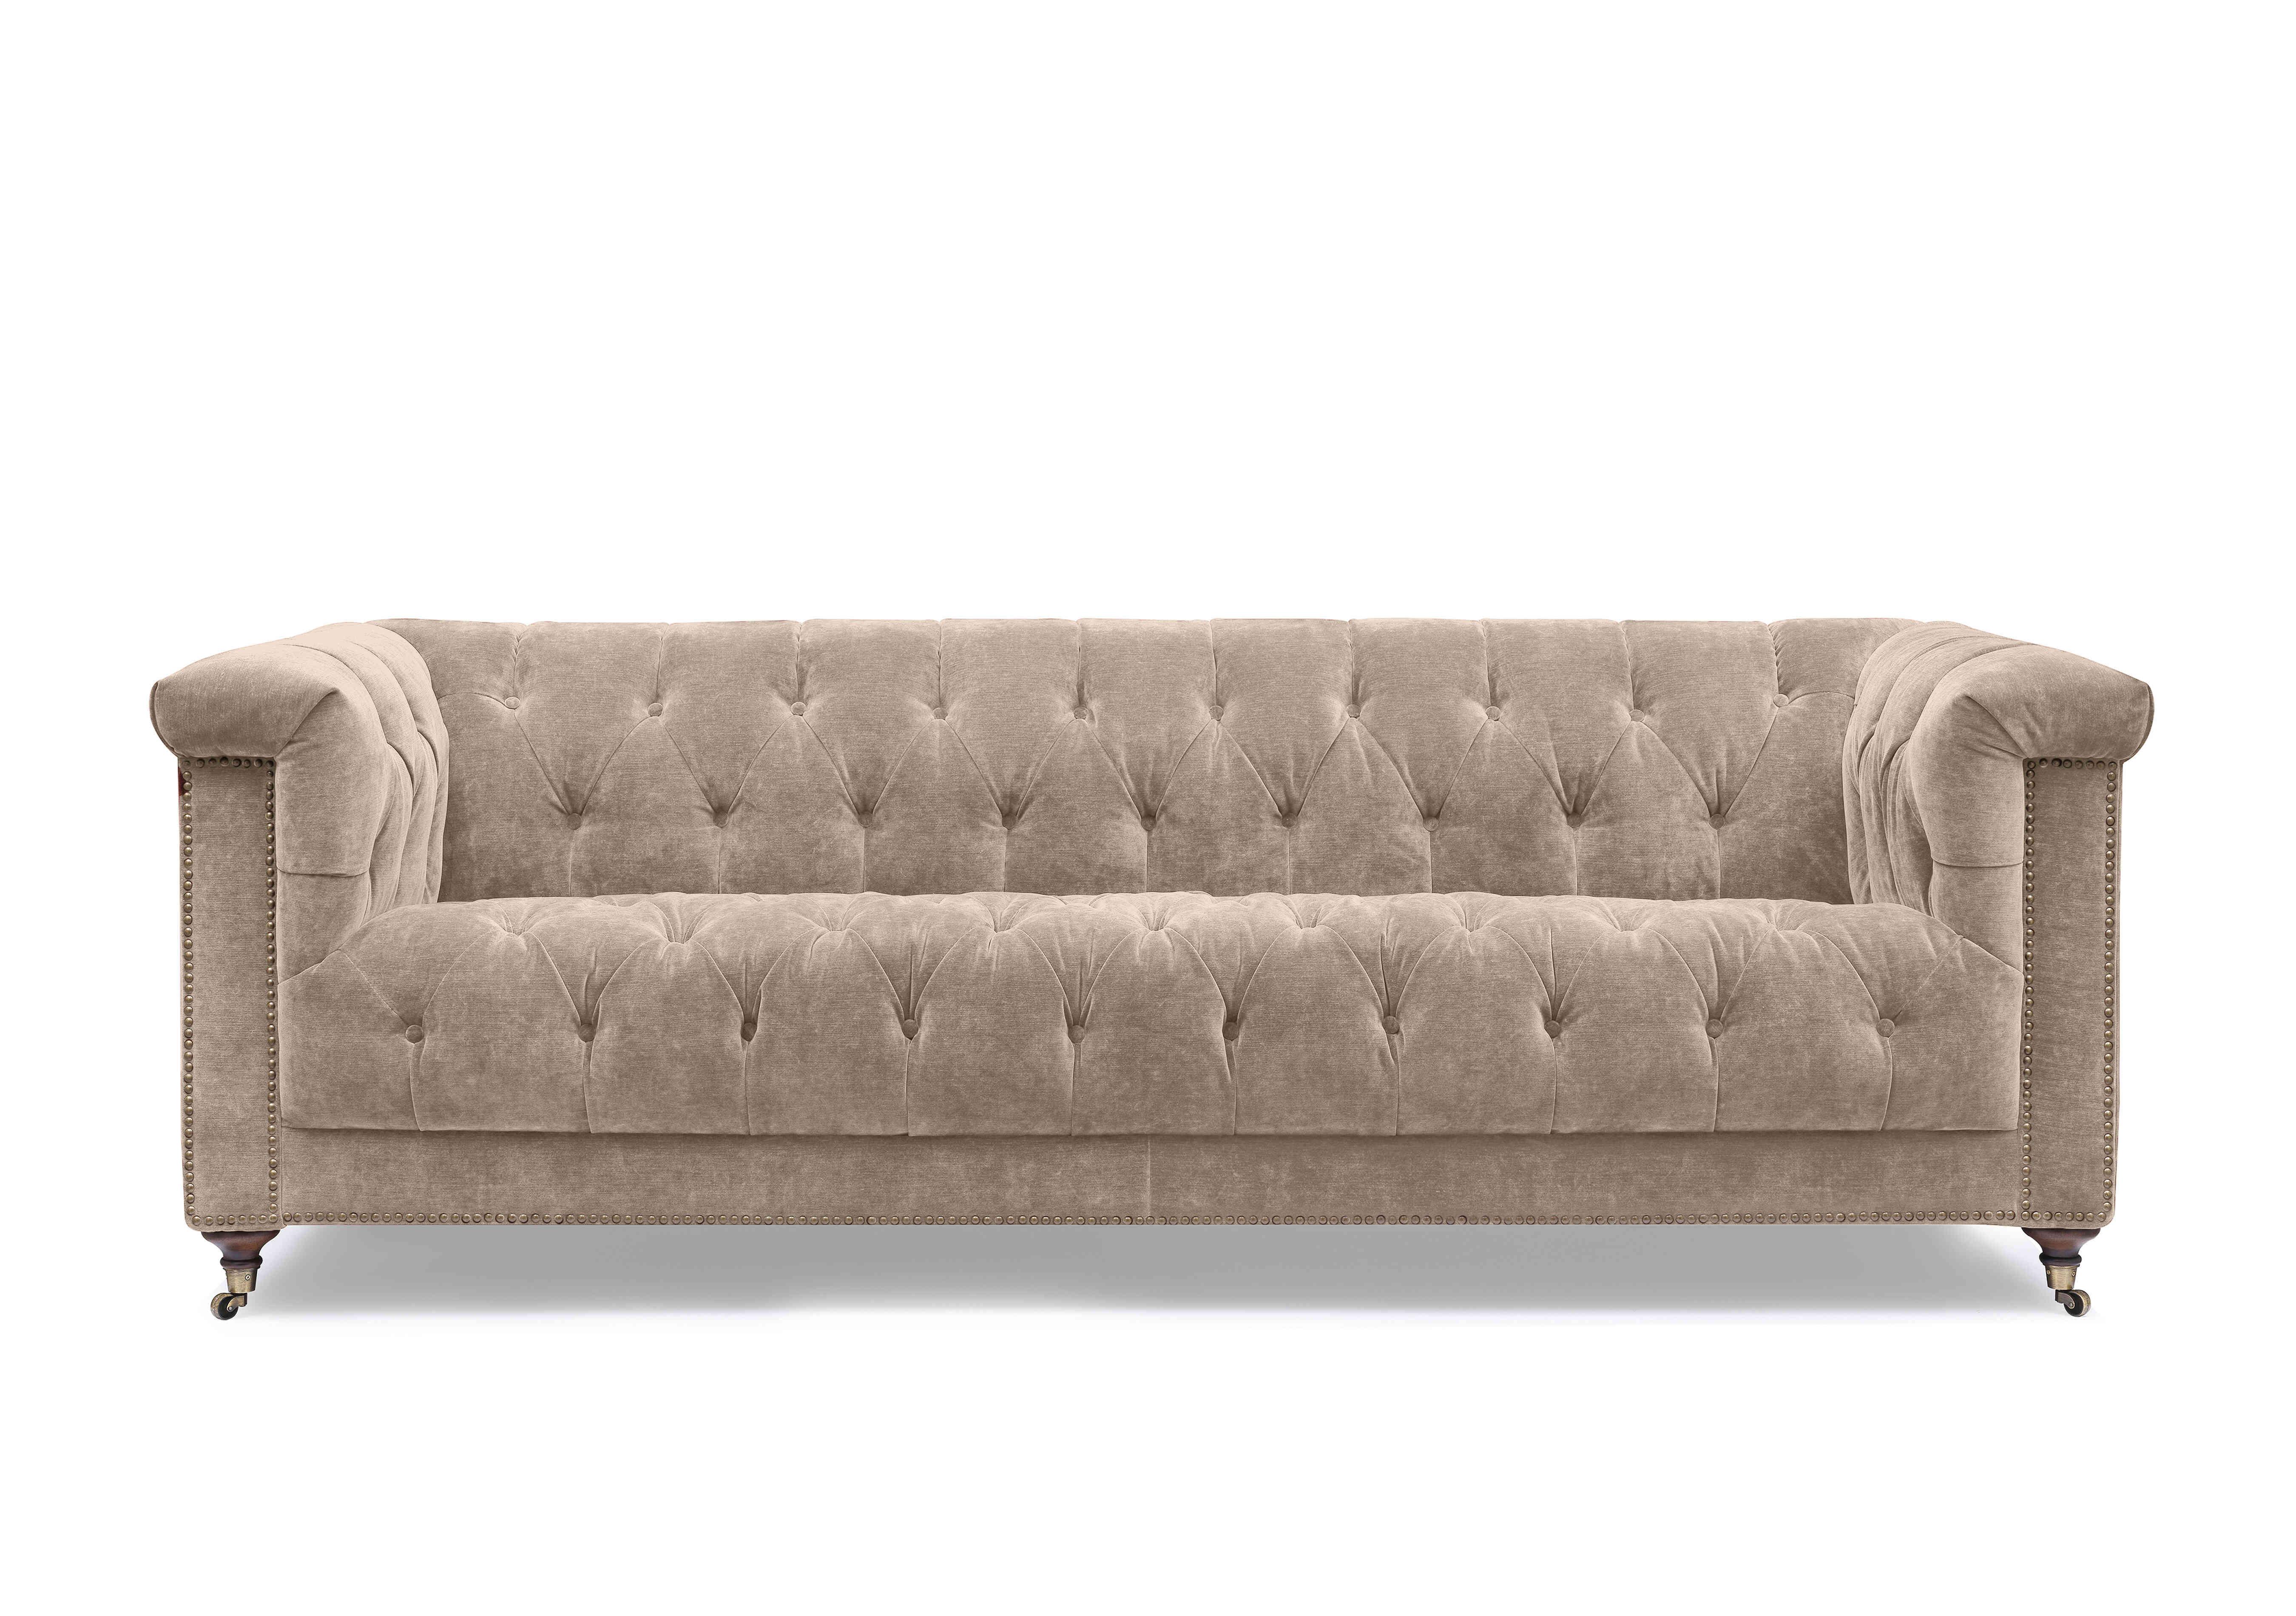 Wallace 4 Seater Fabric Chesterfield Sofa with USB-C in X3y1-W022 Barley on Furniture Village